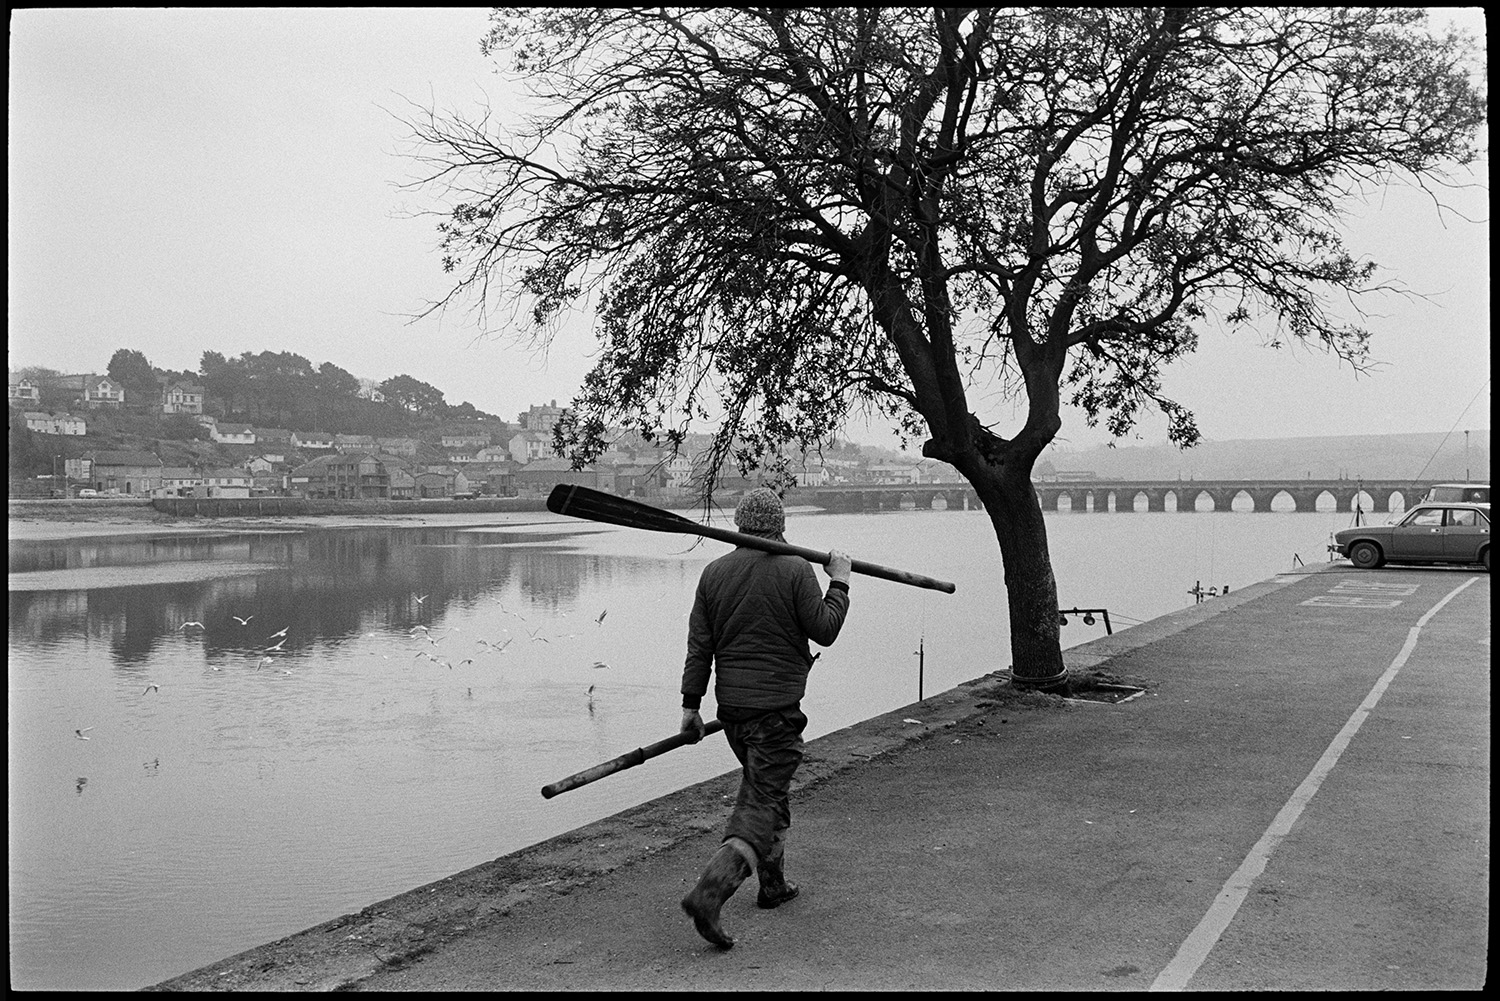 River and quay, oarsmen, fishermen mending nets, old bridge in background, fishing boats. 
[A person walking along Bideford Quay carrying two oars. They are passing a tree. Bideford old bridge can be seen in the background and houses are visible on the opposite side of the River Torridge.]